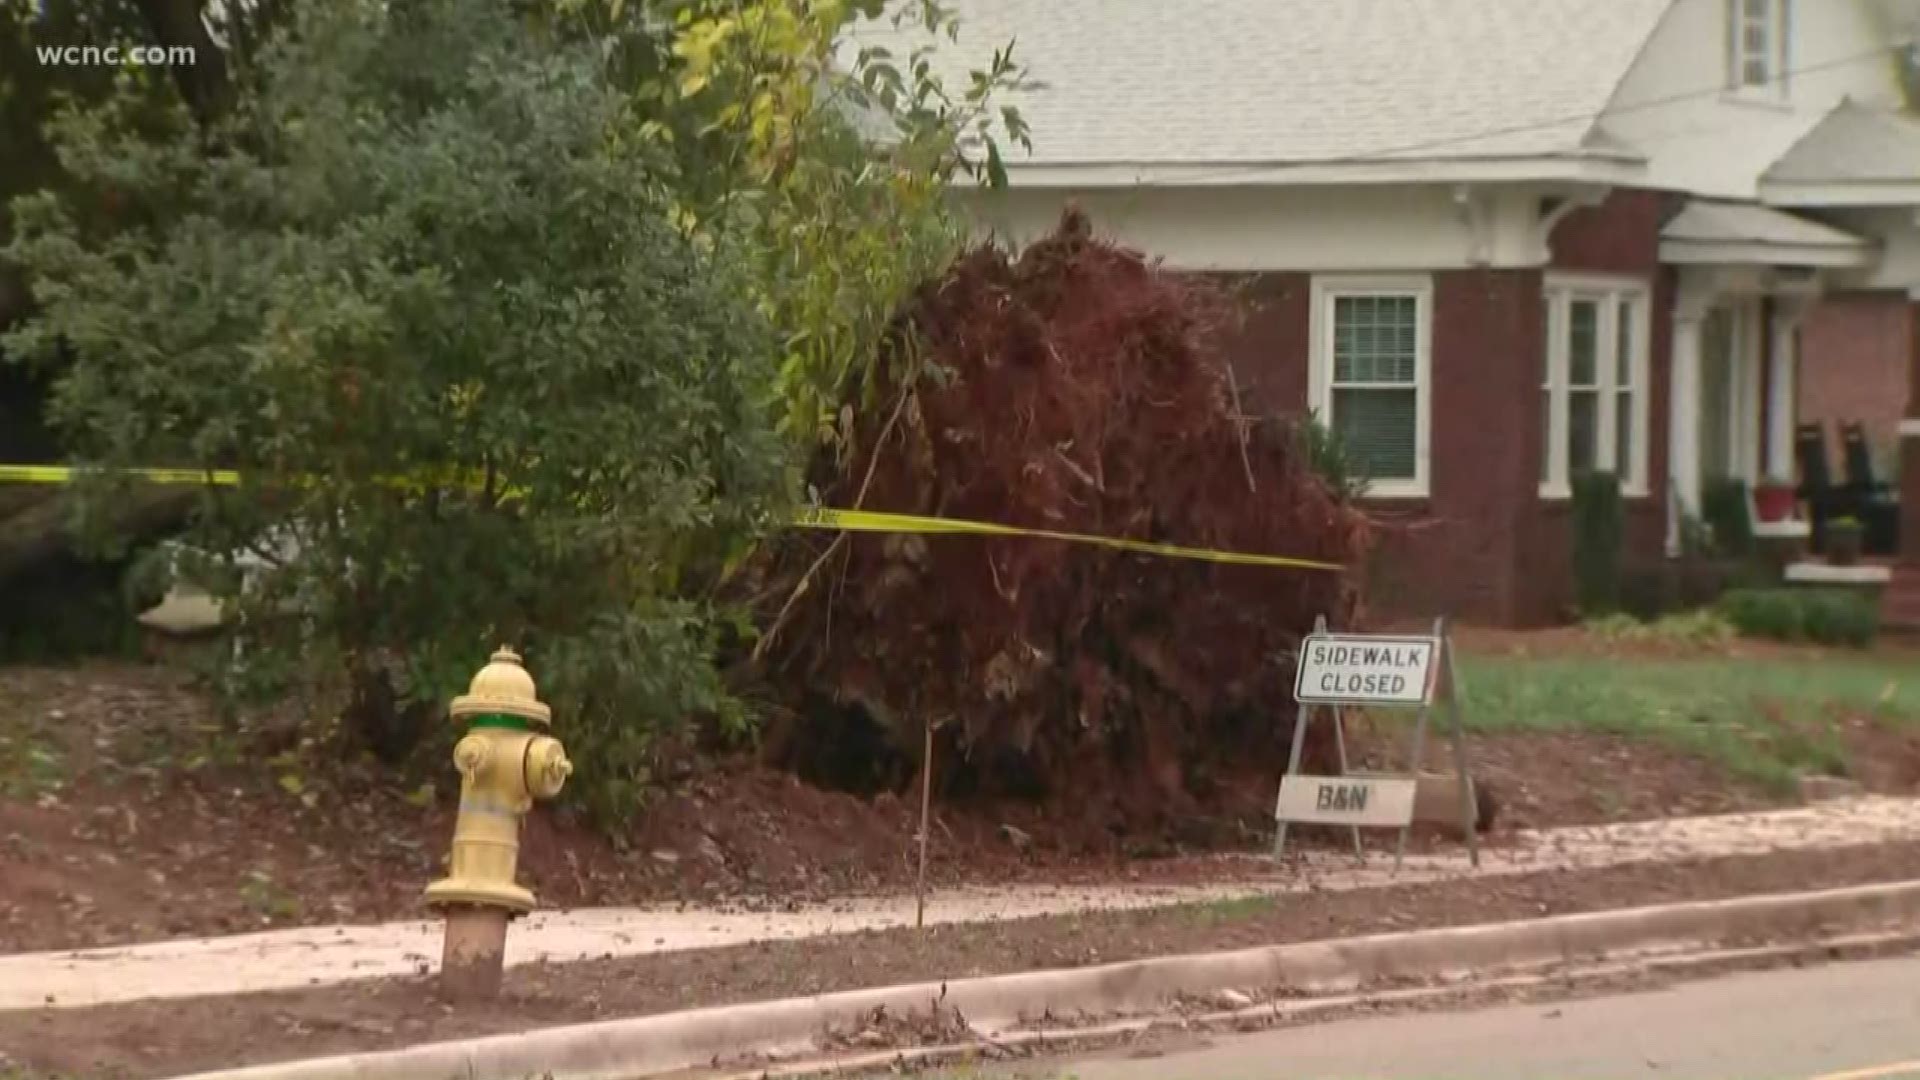 The homeowner was not home when the tree fell.